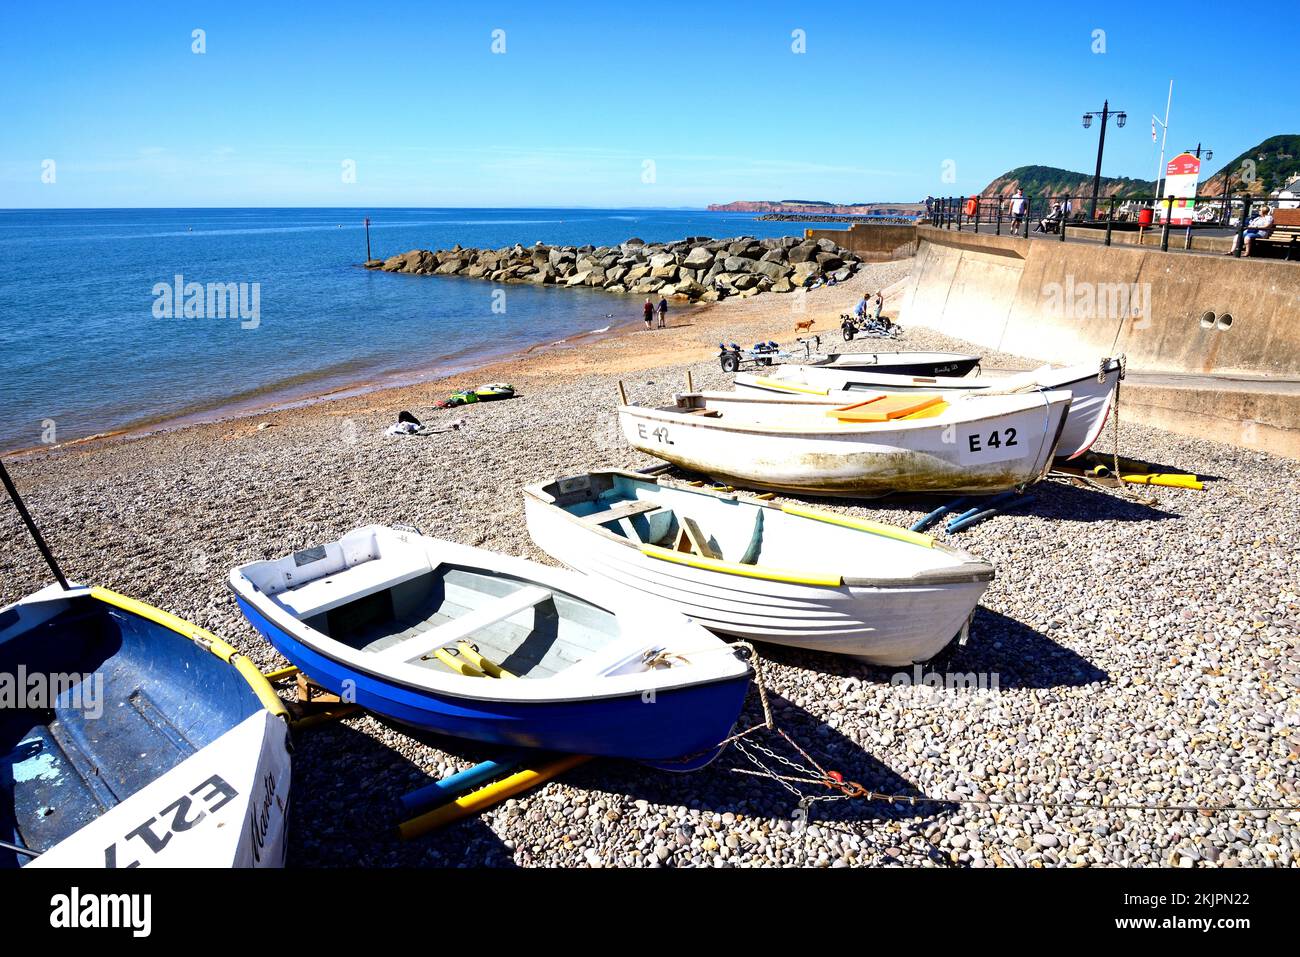 Small boats moored on the beach with views towards the promenade and cliffs, Sidmouth, Devon, UK, Europe. Stock Photo